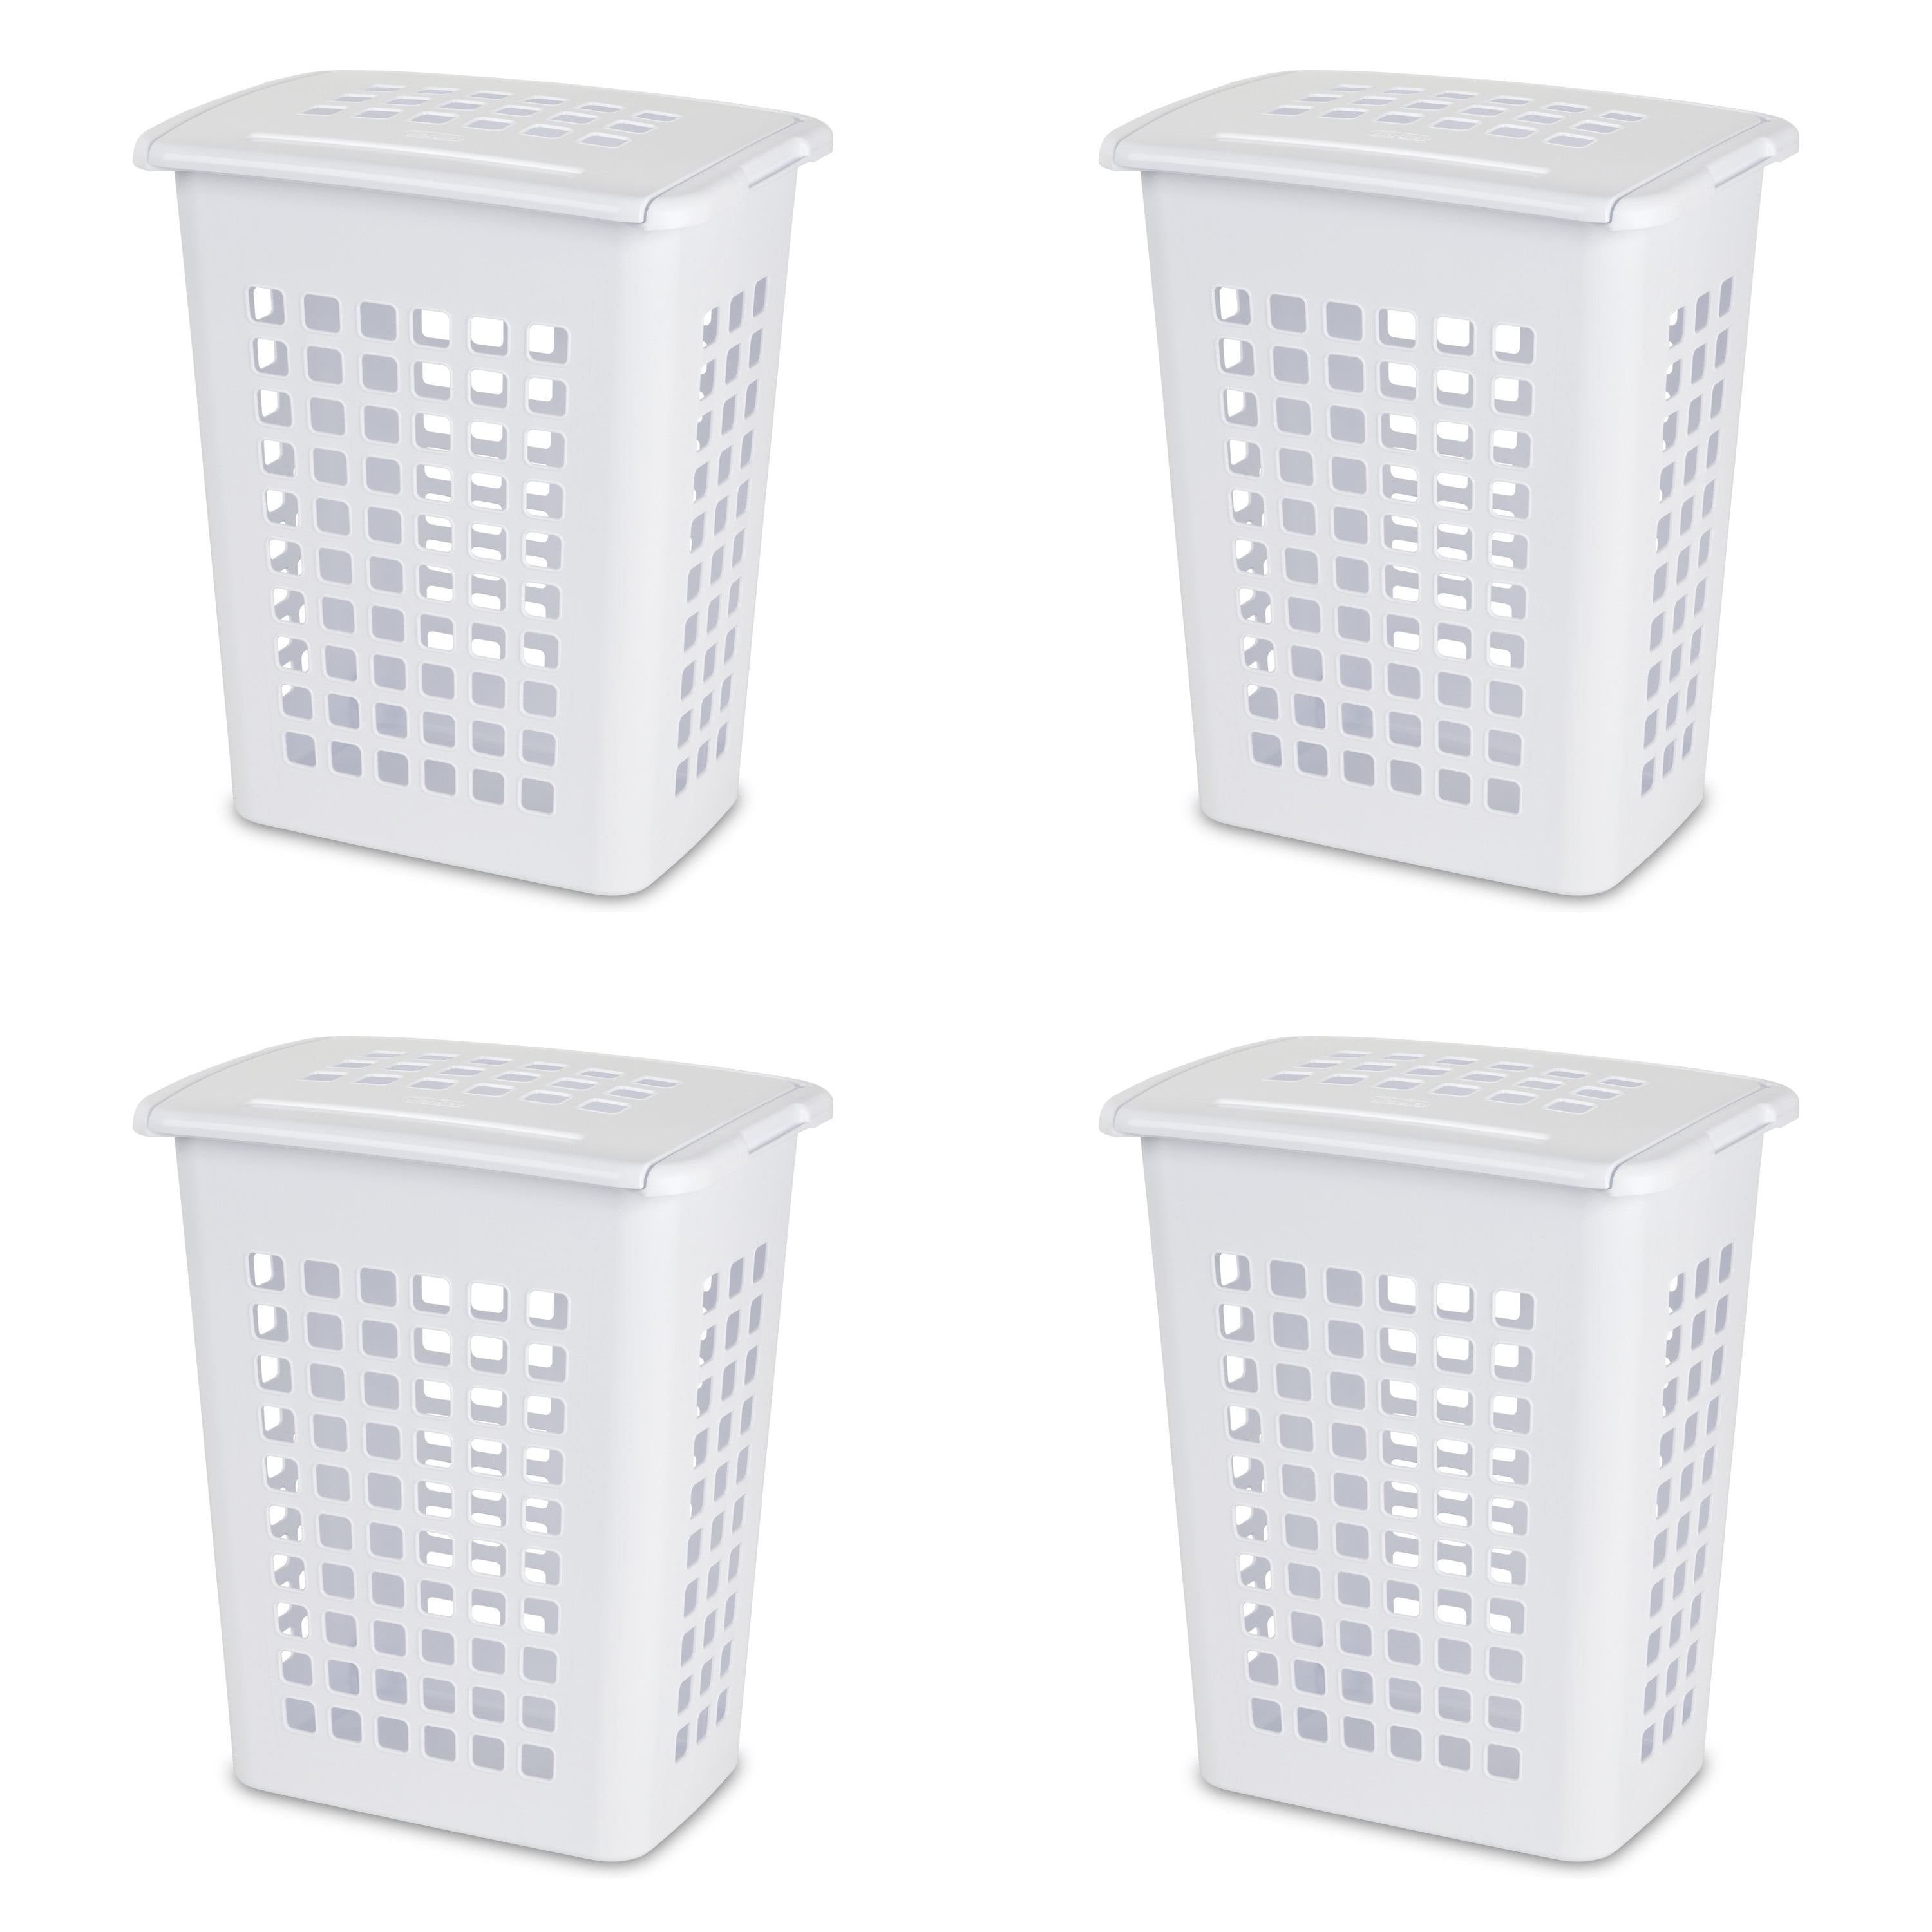 4 Pack Sterilite Plastic Wicker Weave Dirty Clothes Laundry Hamper Bin and Lid 